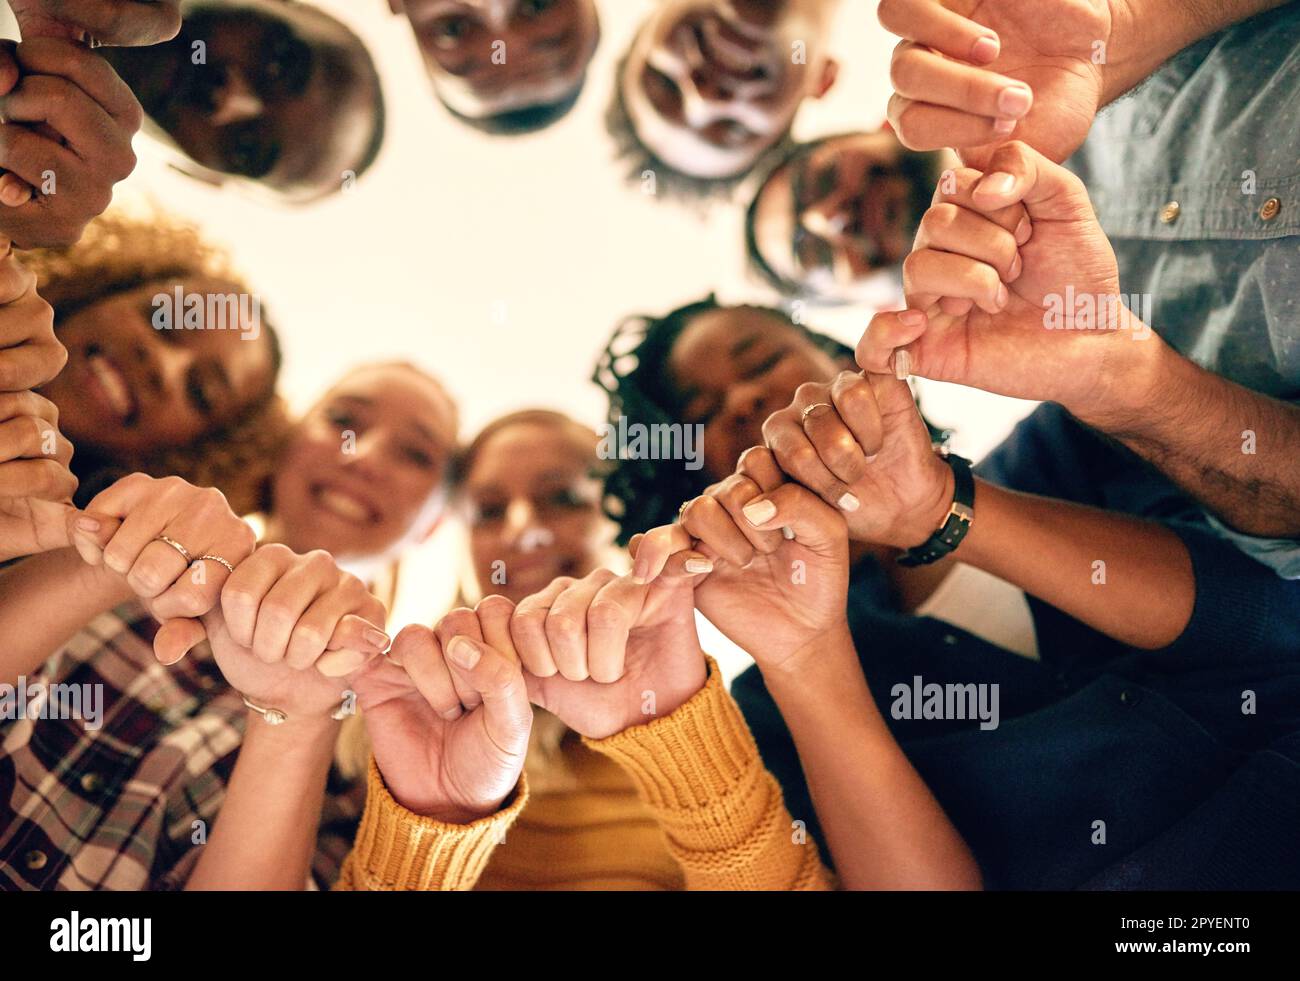 Hands of strength and support. Low angle shot of a group of people joining their hands together. Stock Photo